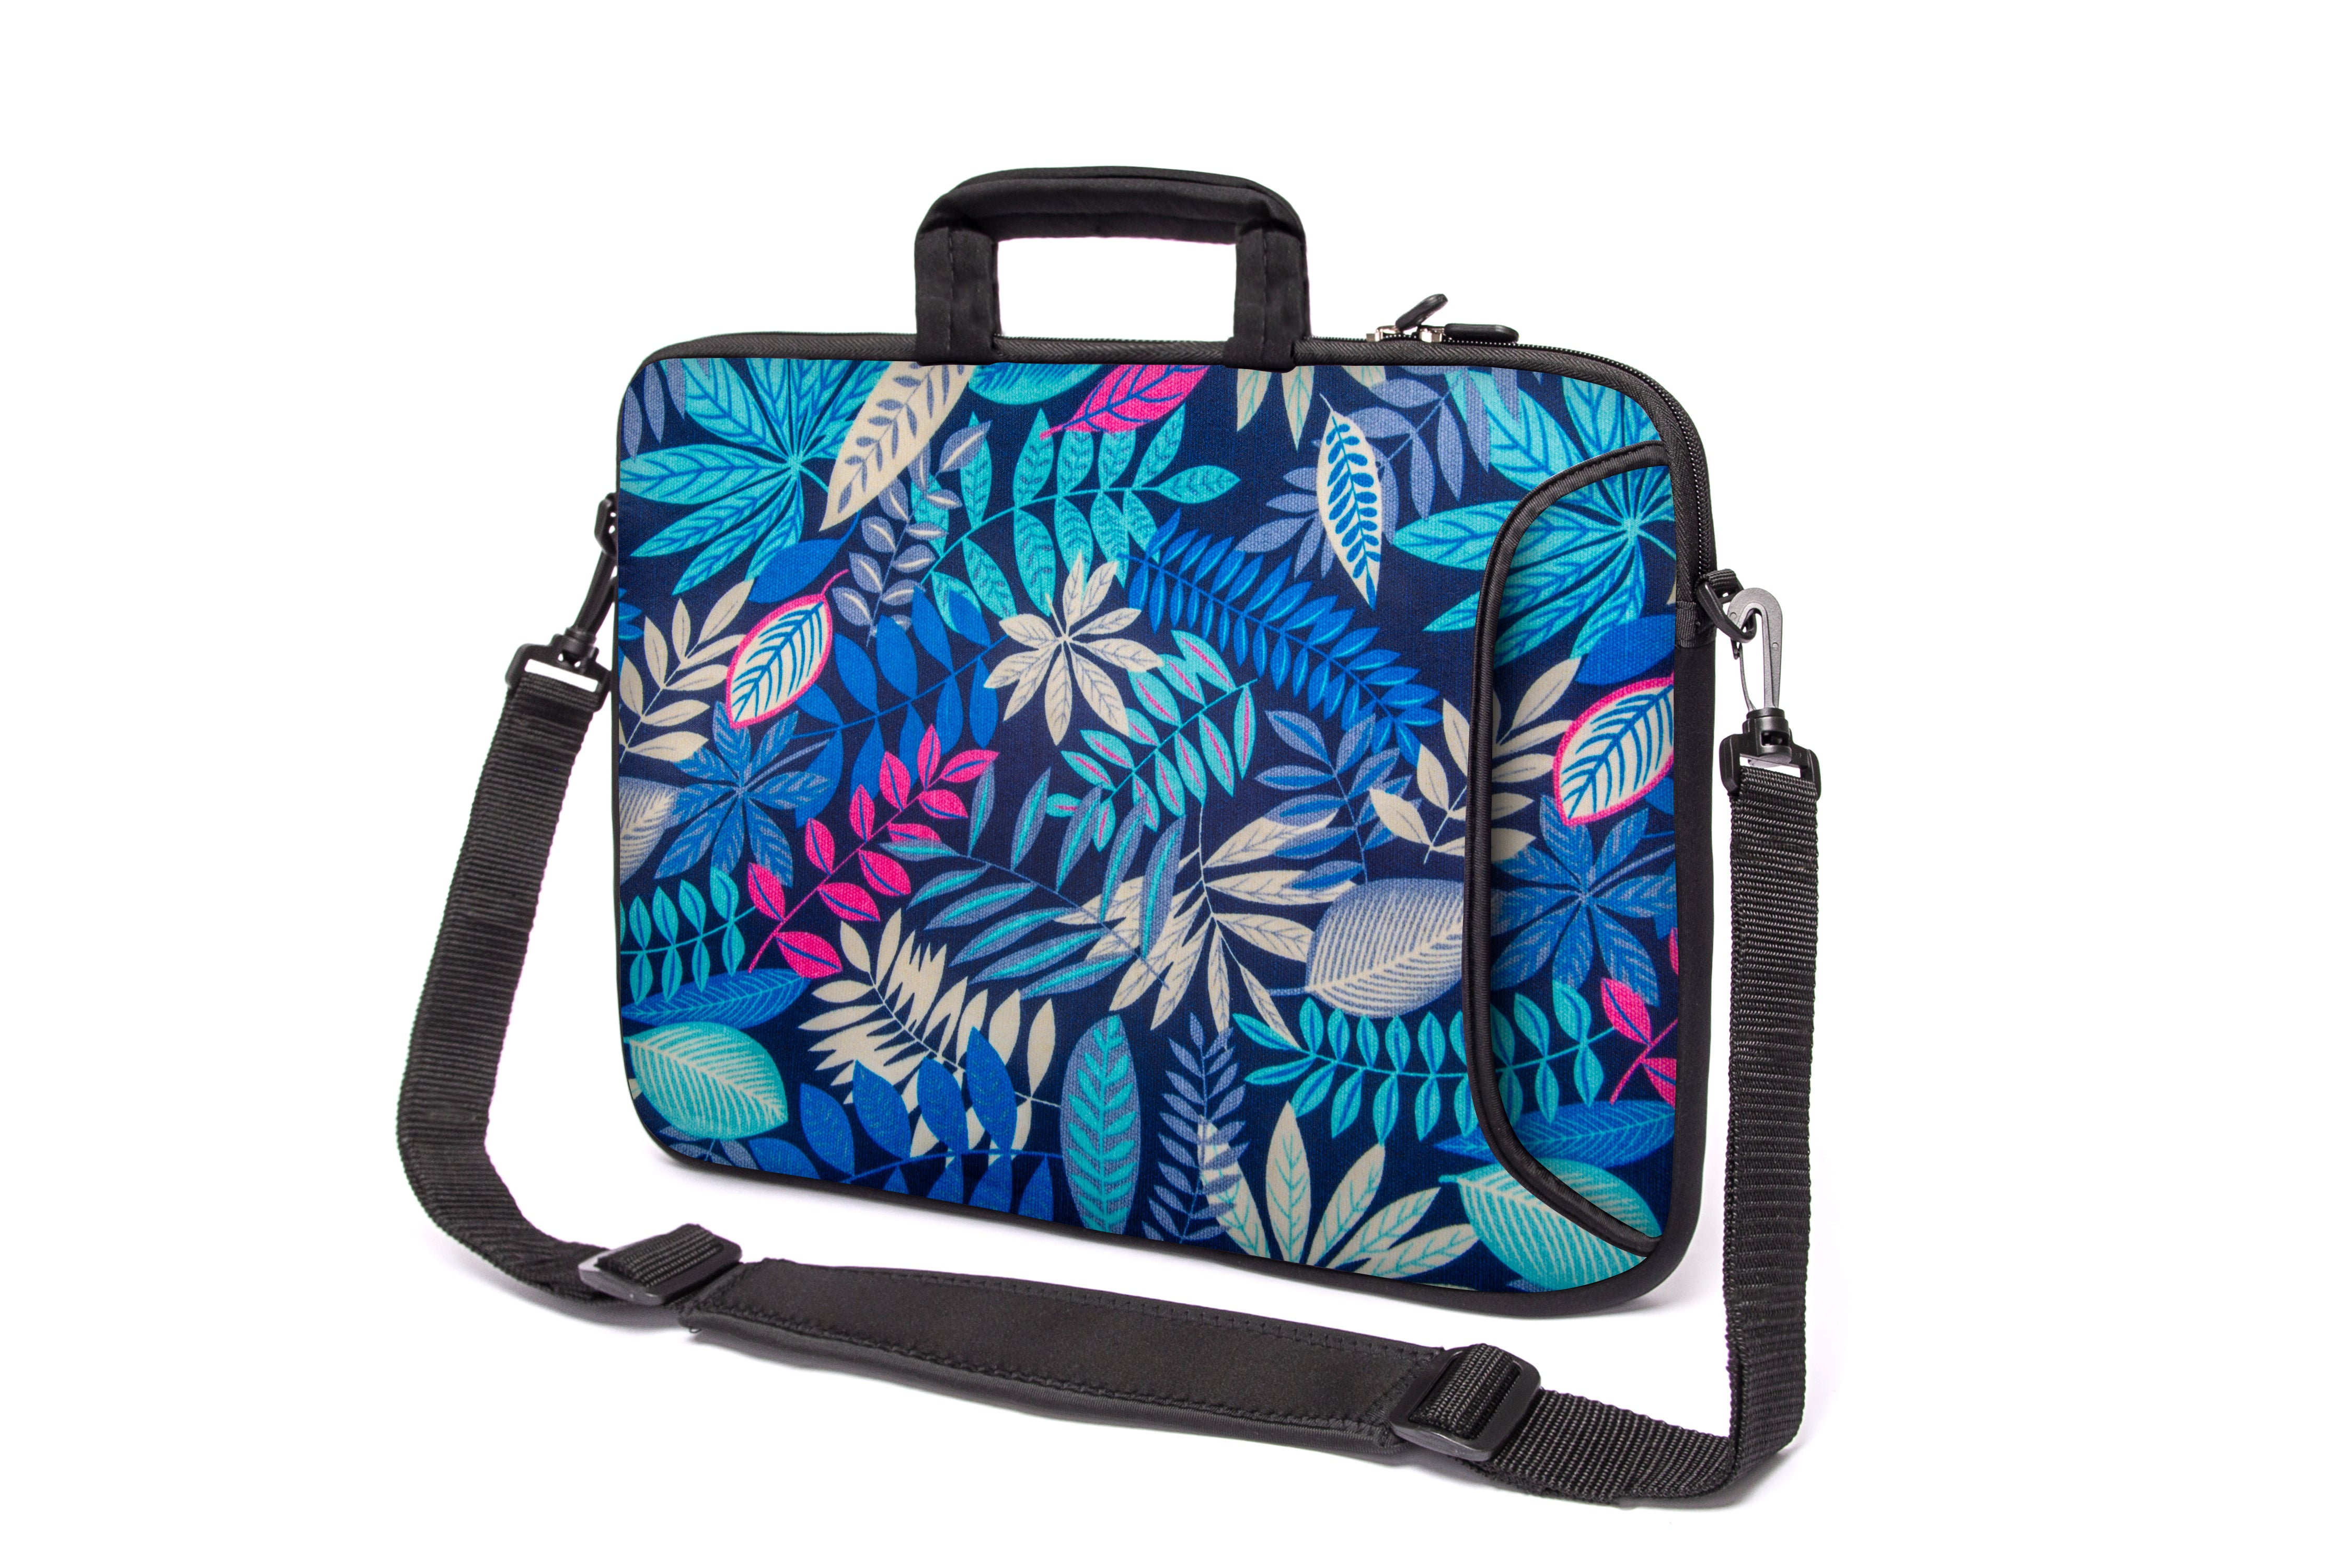 15"- 15.6" (inch) LAPTOP BAG CARRY CASE/BAG WITH HANDLE & STRAP NEOPRENE FOR LAPTOPS/NOTEBOOKS, *Blue Forrest*